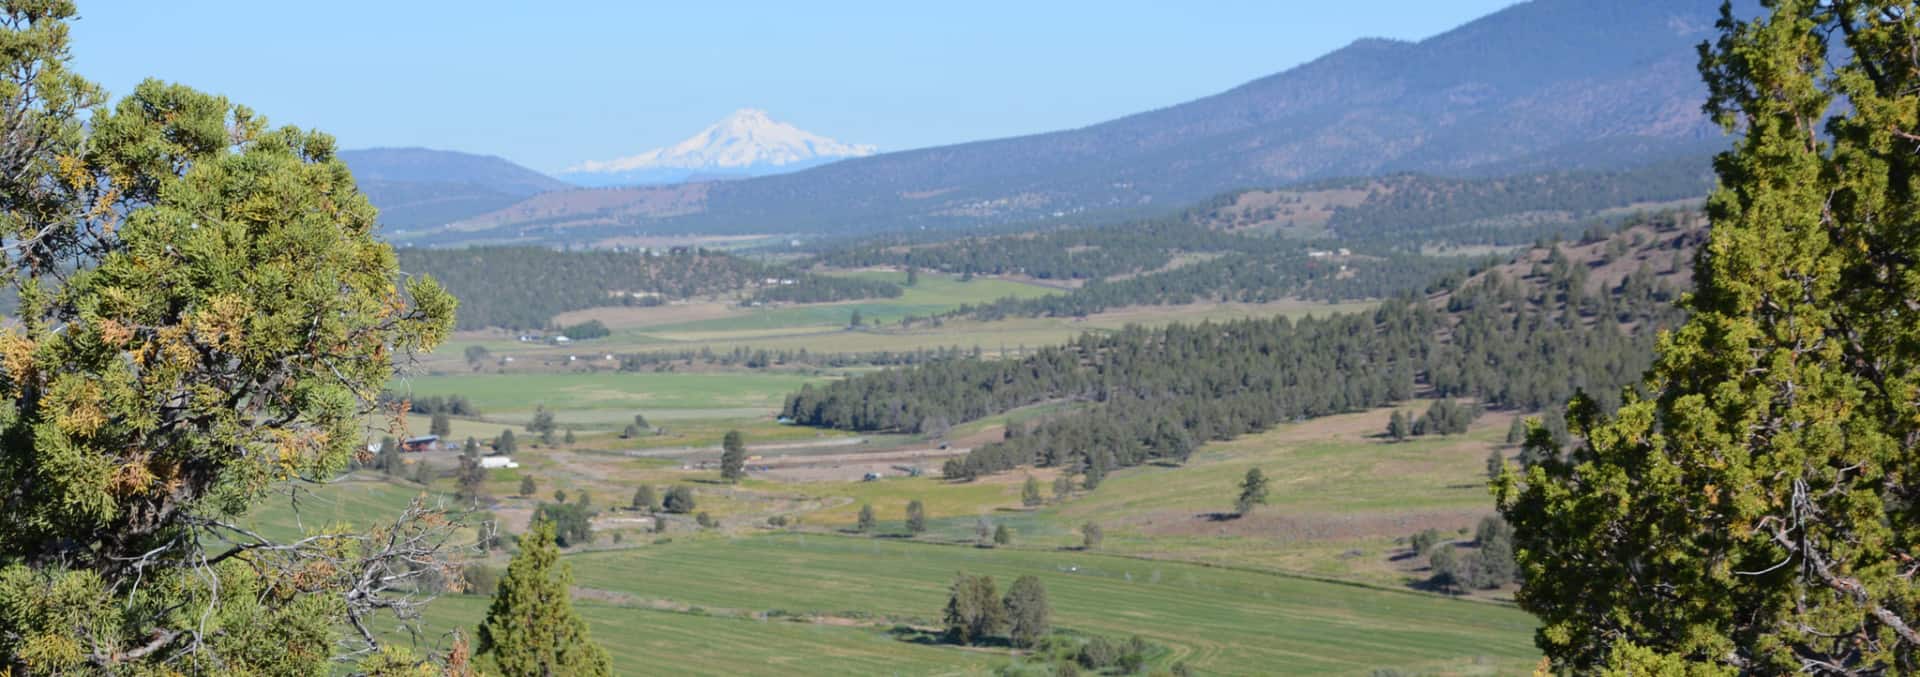 Oregon Ranch land For Sale Dry Creek Hunting Reserve